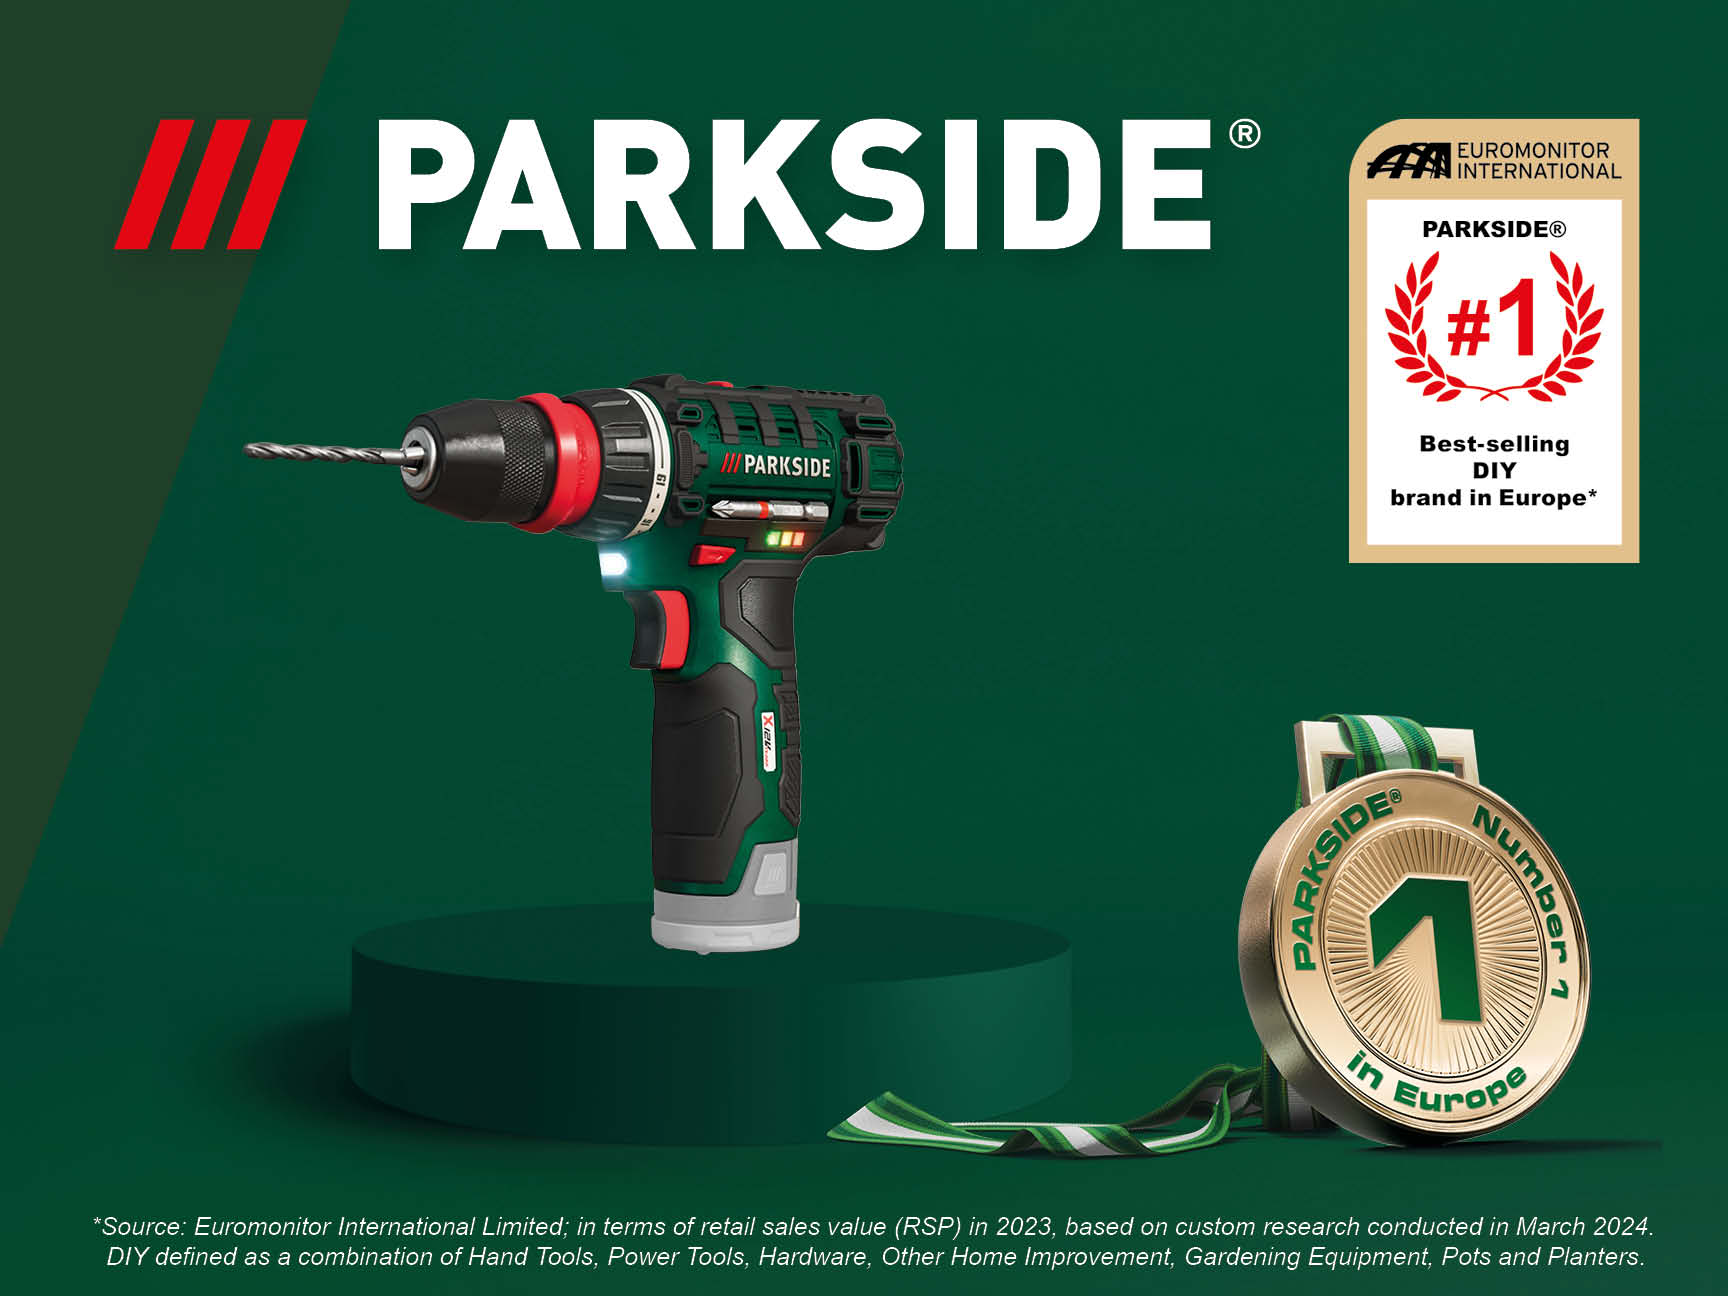 PARKSIDE®: You got this! You got the tools for winnings!